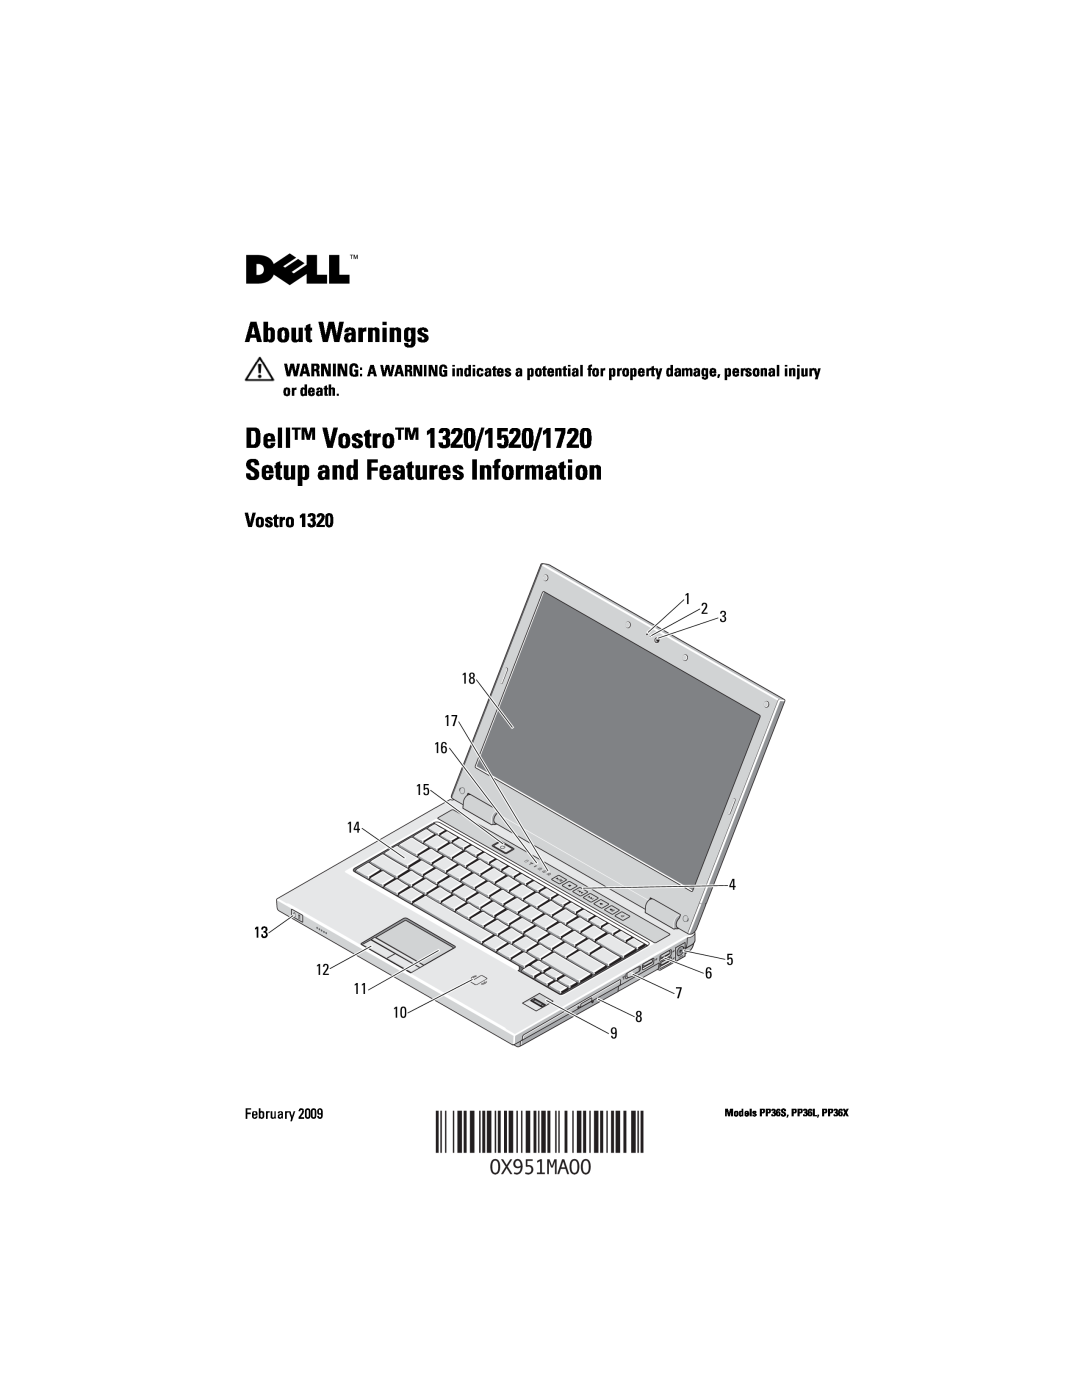 Dell manual TY2009 AARP Dell Vostro 1520 Laptop Tune-up 